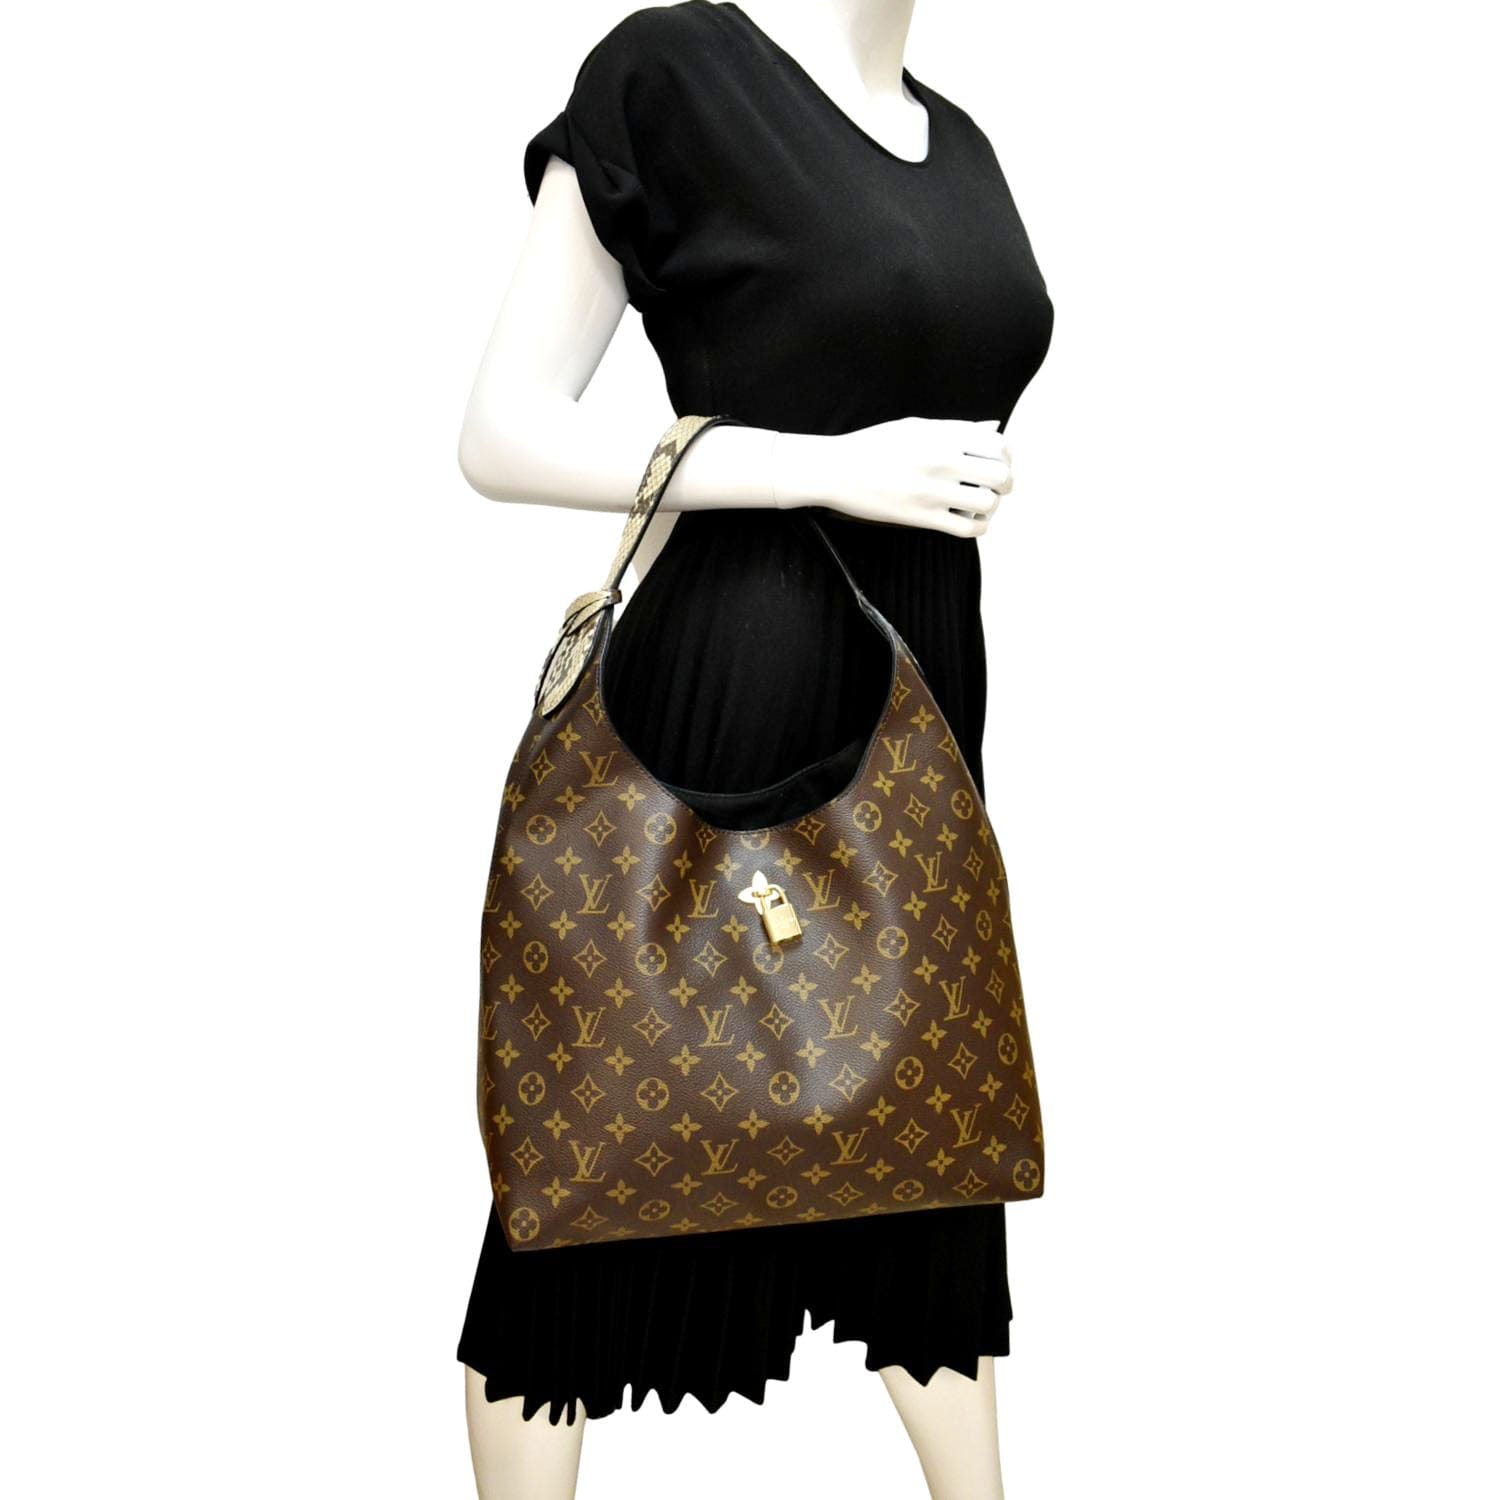 LV Flower Hobo is sold out but we have a NEW one in time for Fall